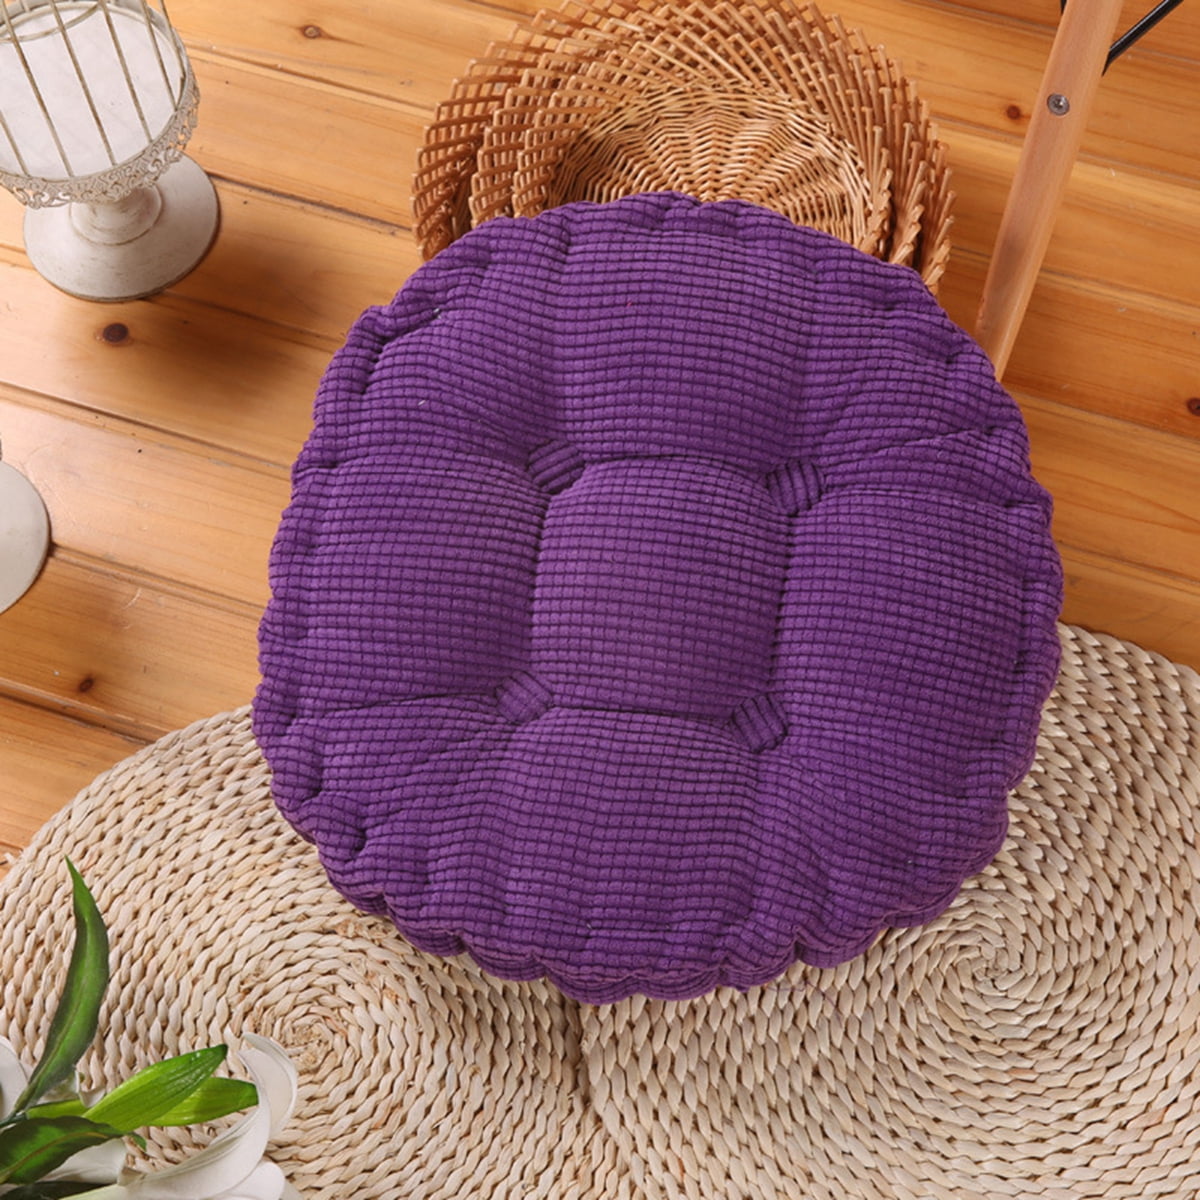 Thick Chair Seat Cushions, Soft Chair Cushions For Dining Room, Indoor And  Outdoor Chair Cushions For Garden, Home Office (50 X 50 Cm, Purple)